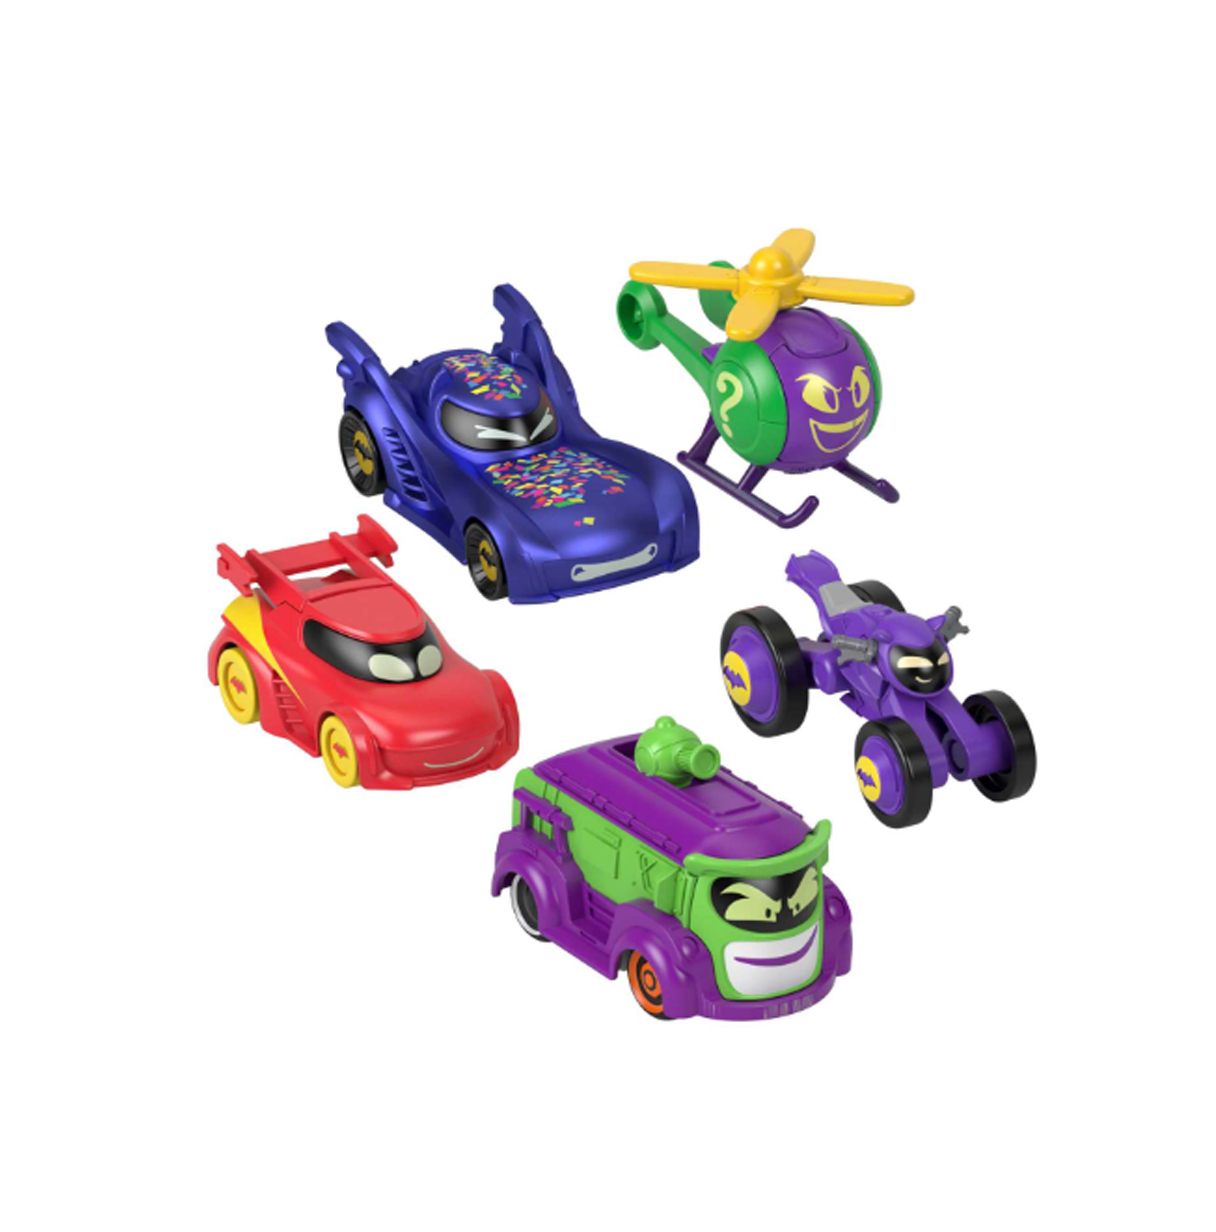 fisher-price batwheels pack 5 coches (mattel - hml21)